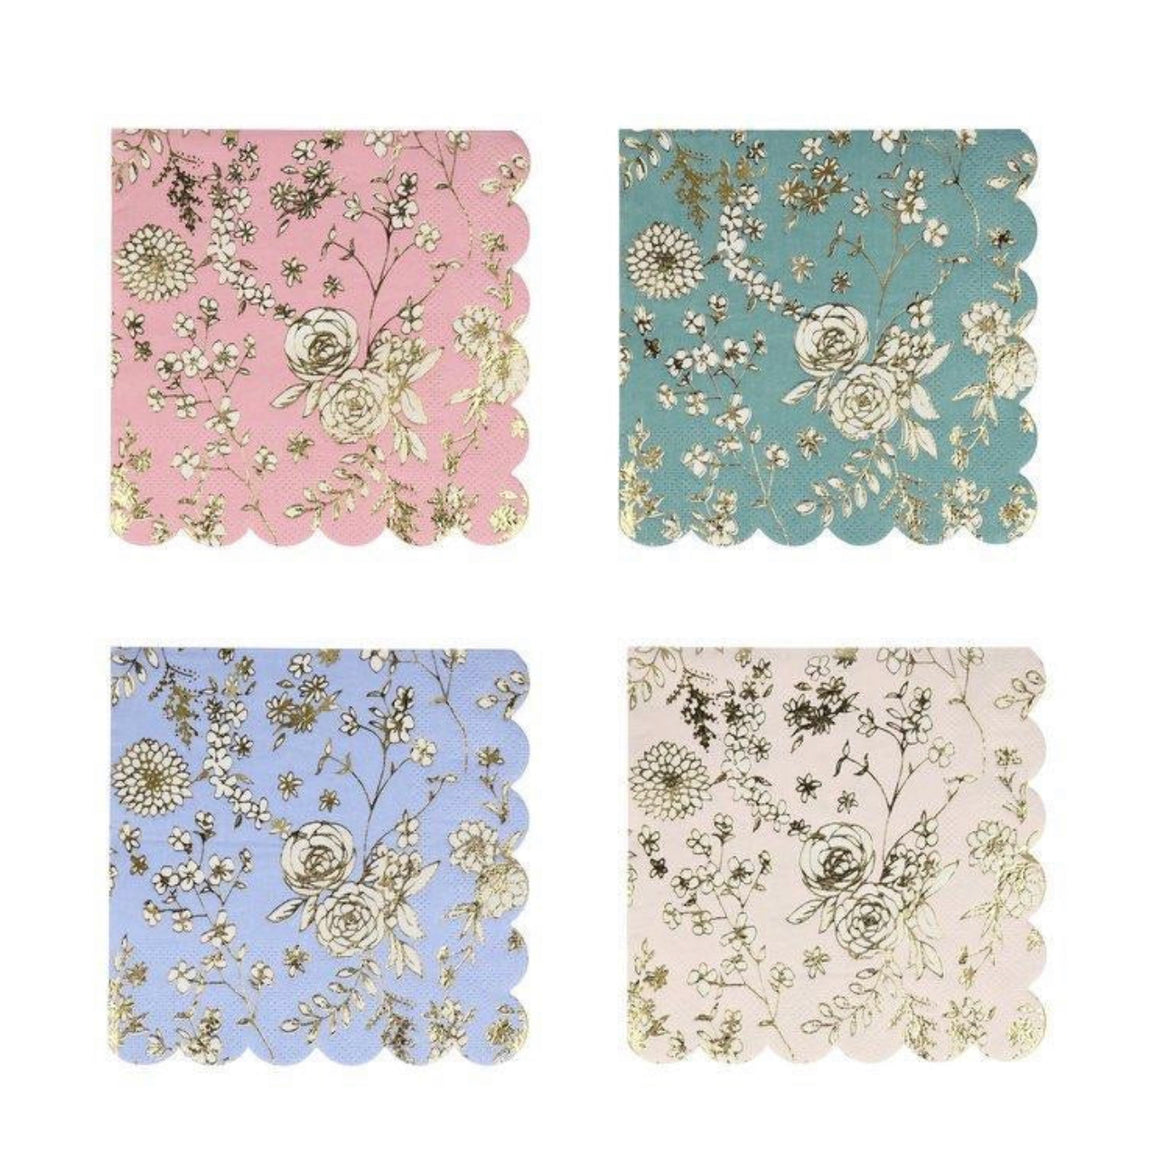 NAPKINS SMALL - FLORAL LACE ENGLISH GARDEN